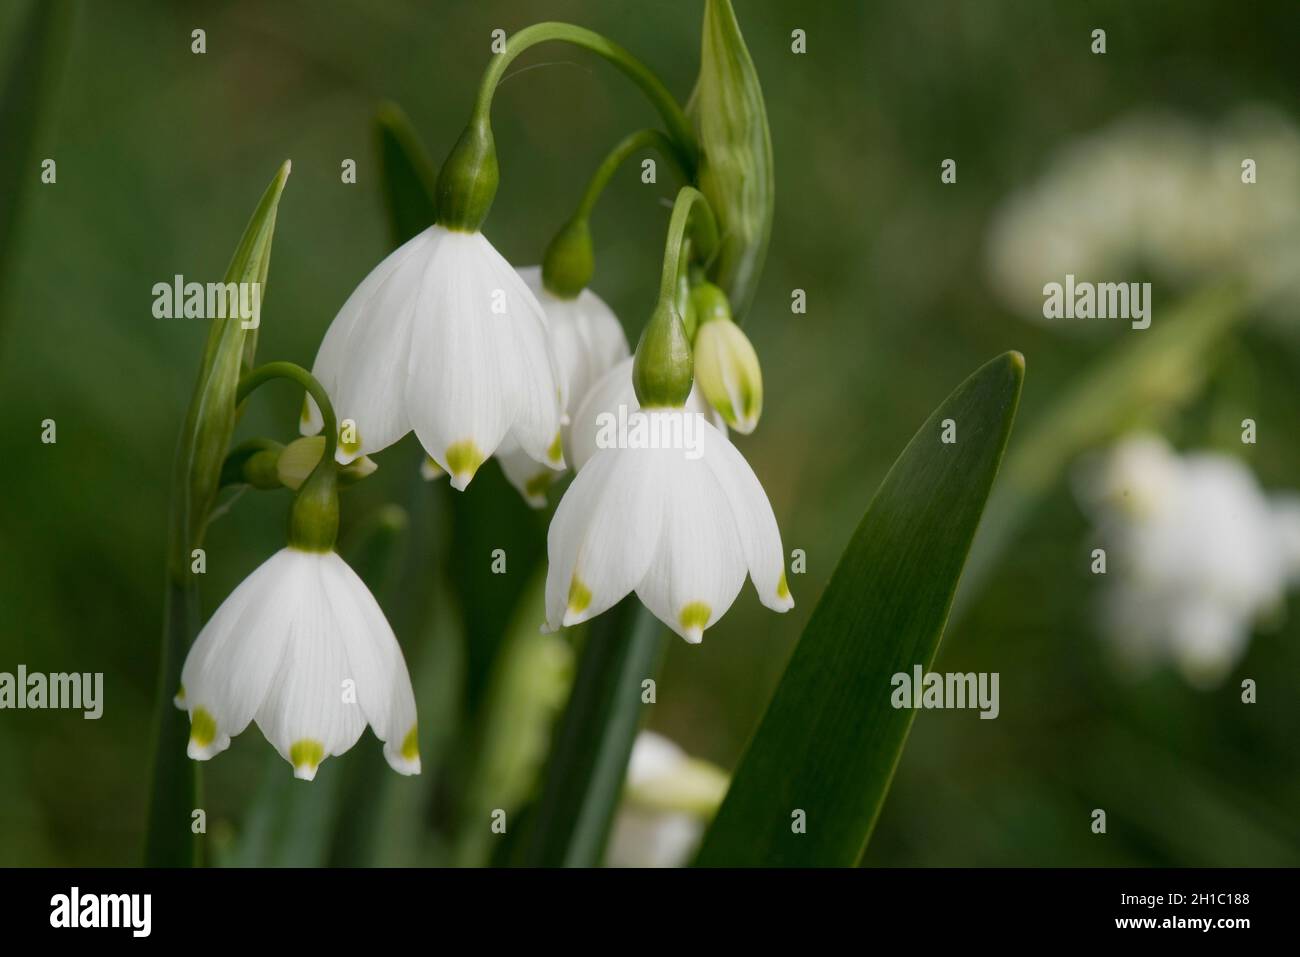 An umbel of flowers of summer snowflake or Loddon lily (Leucojum aestivum) with six white sepals each with a green mark at the tip, Berkshire, April Stock Photo